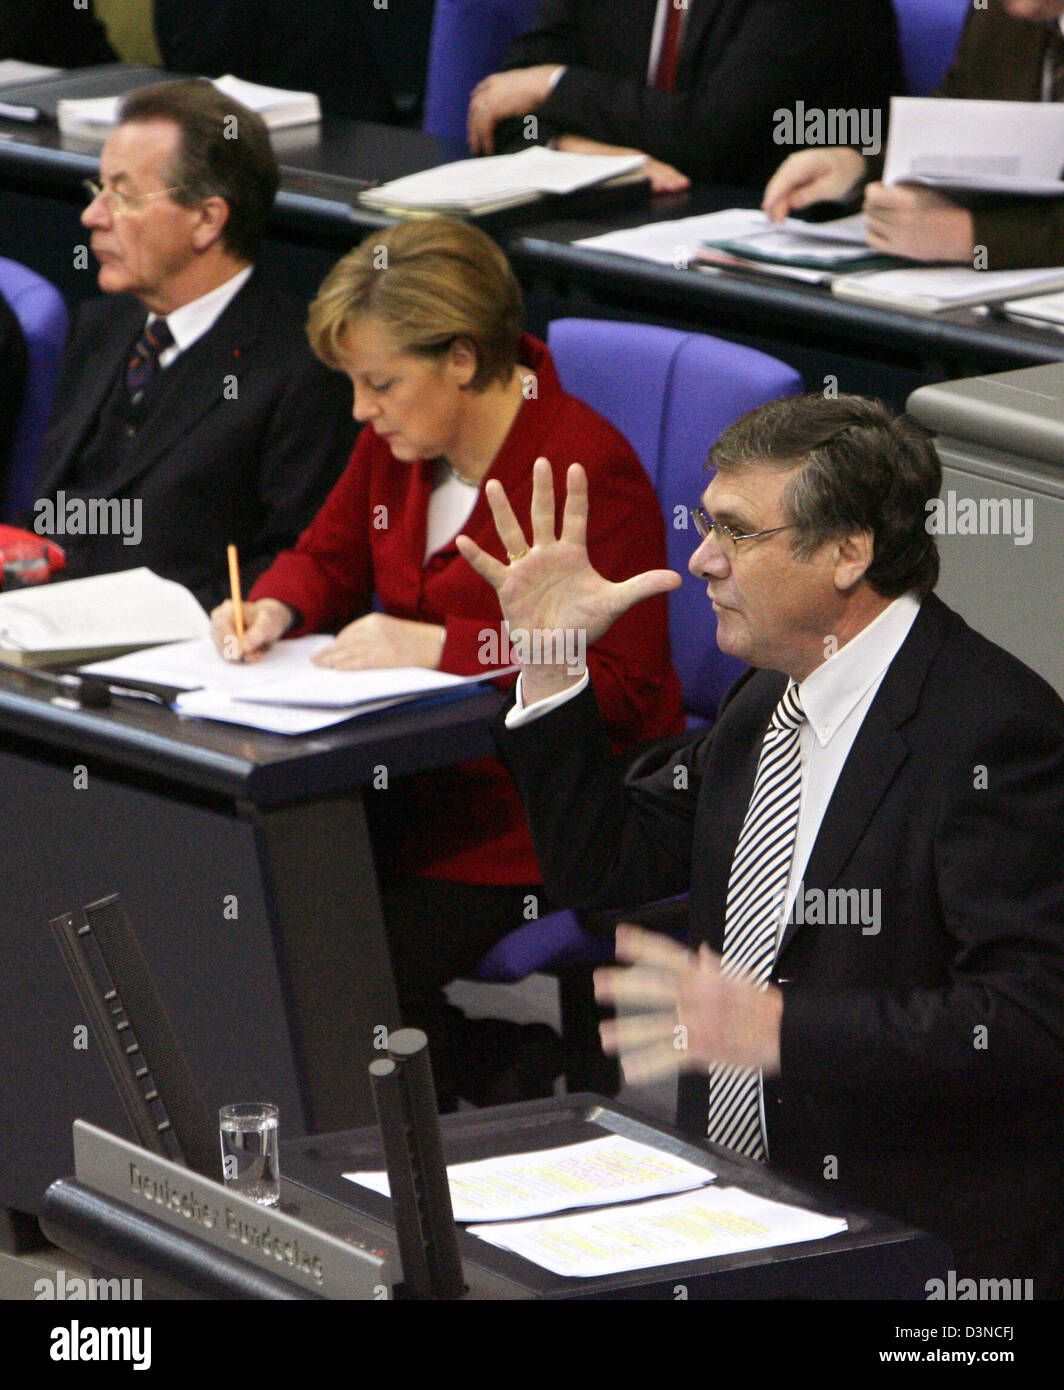 FDP fraction chairman Wolfgang Gerhardt holds a speech standing beside German Chancellor Angela Merkel and Vice-Chancellor Franz Muentefering (R-L) during a German Bundestag budget debate in Berlin, Germany, Wednesday, 29 March 2006. Photo: Steffen Kugler Stock Photo